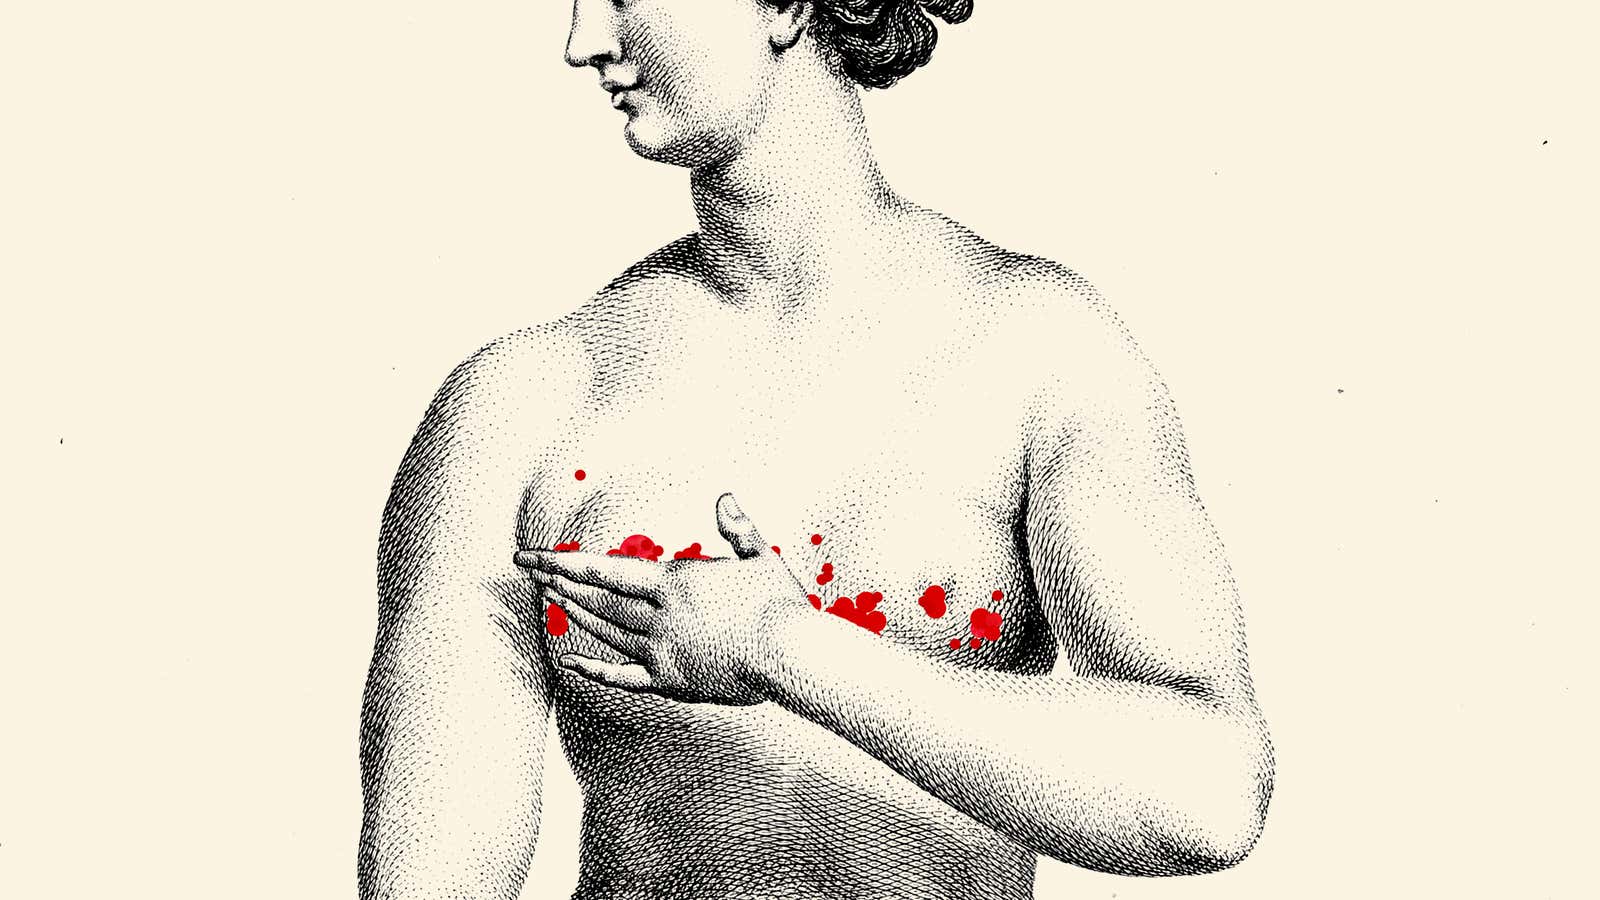 Herpes Drew a Scarlet Letter Across My Breasts